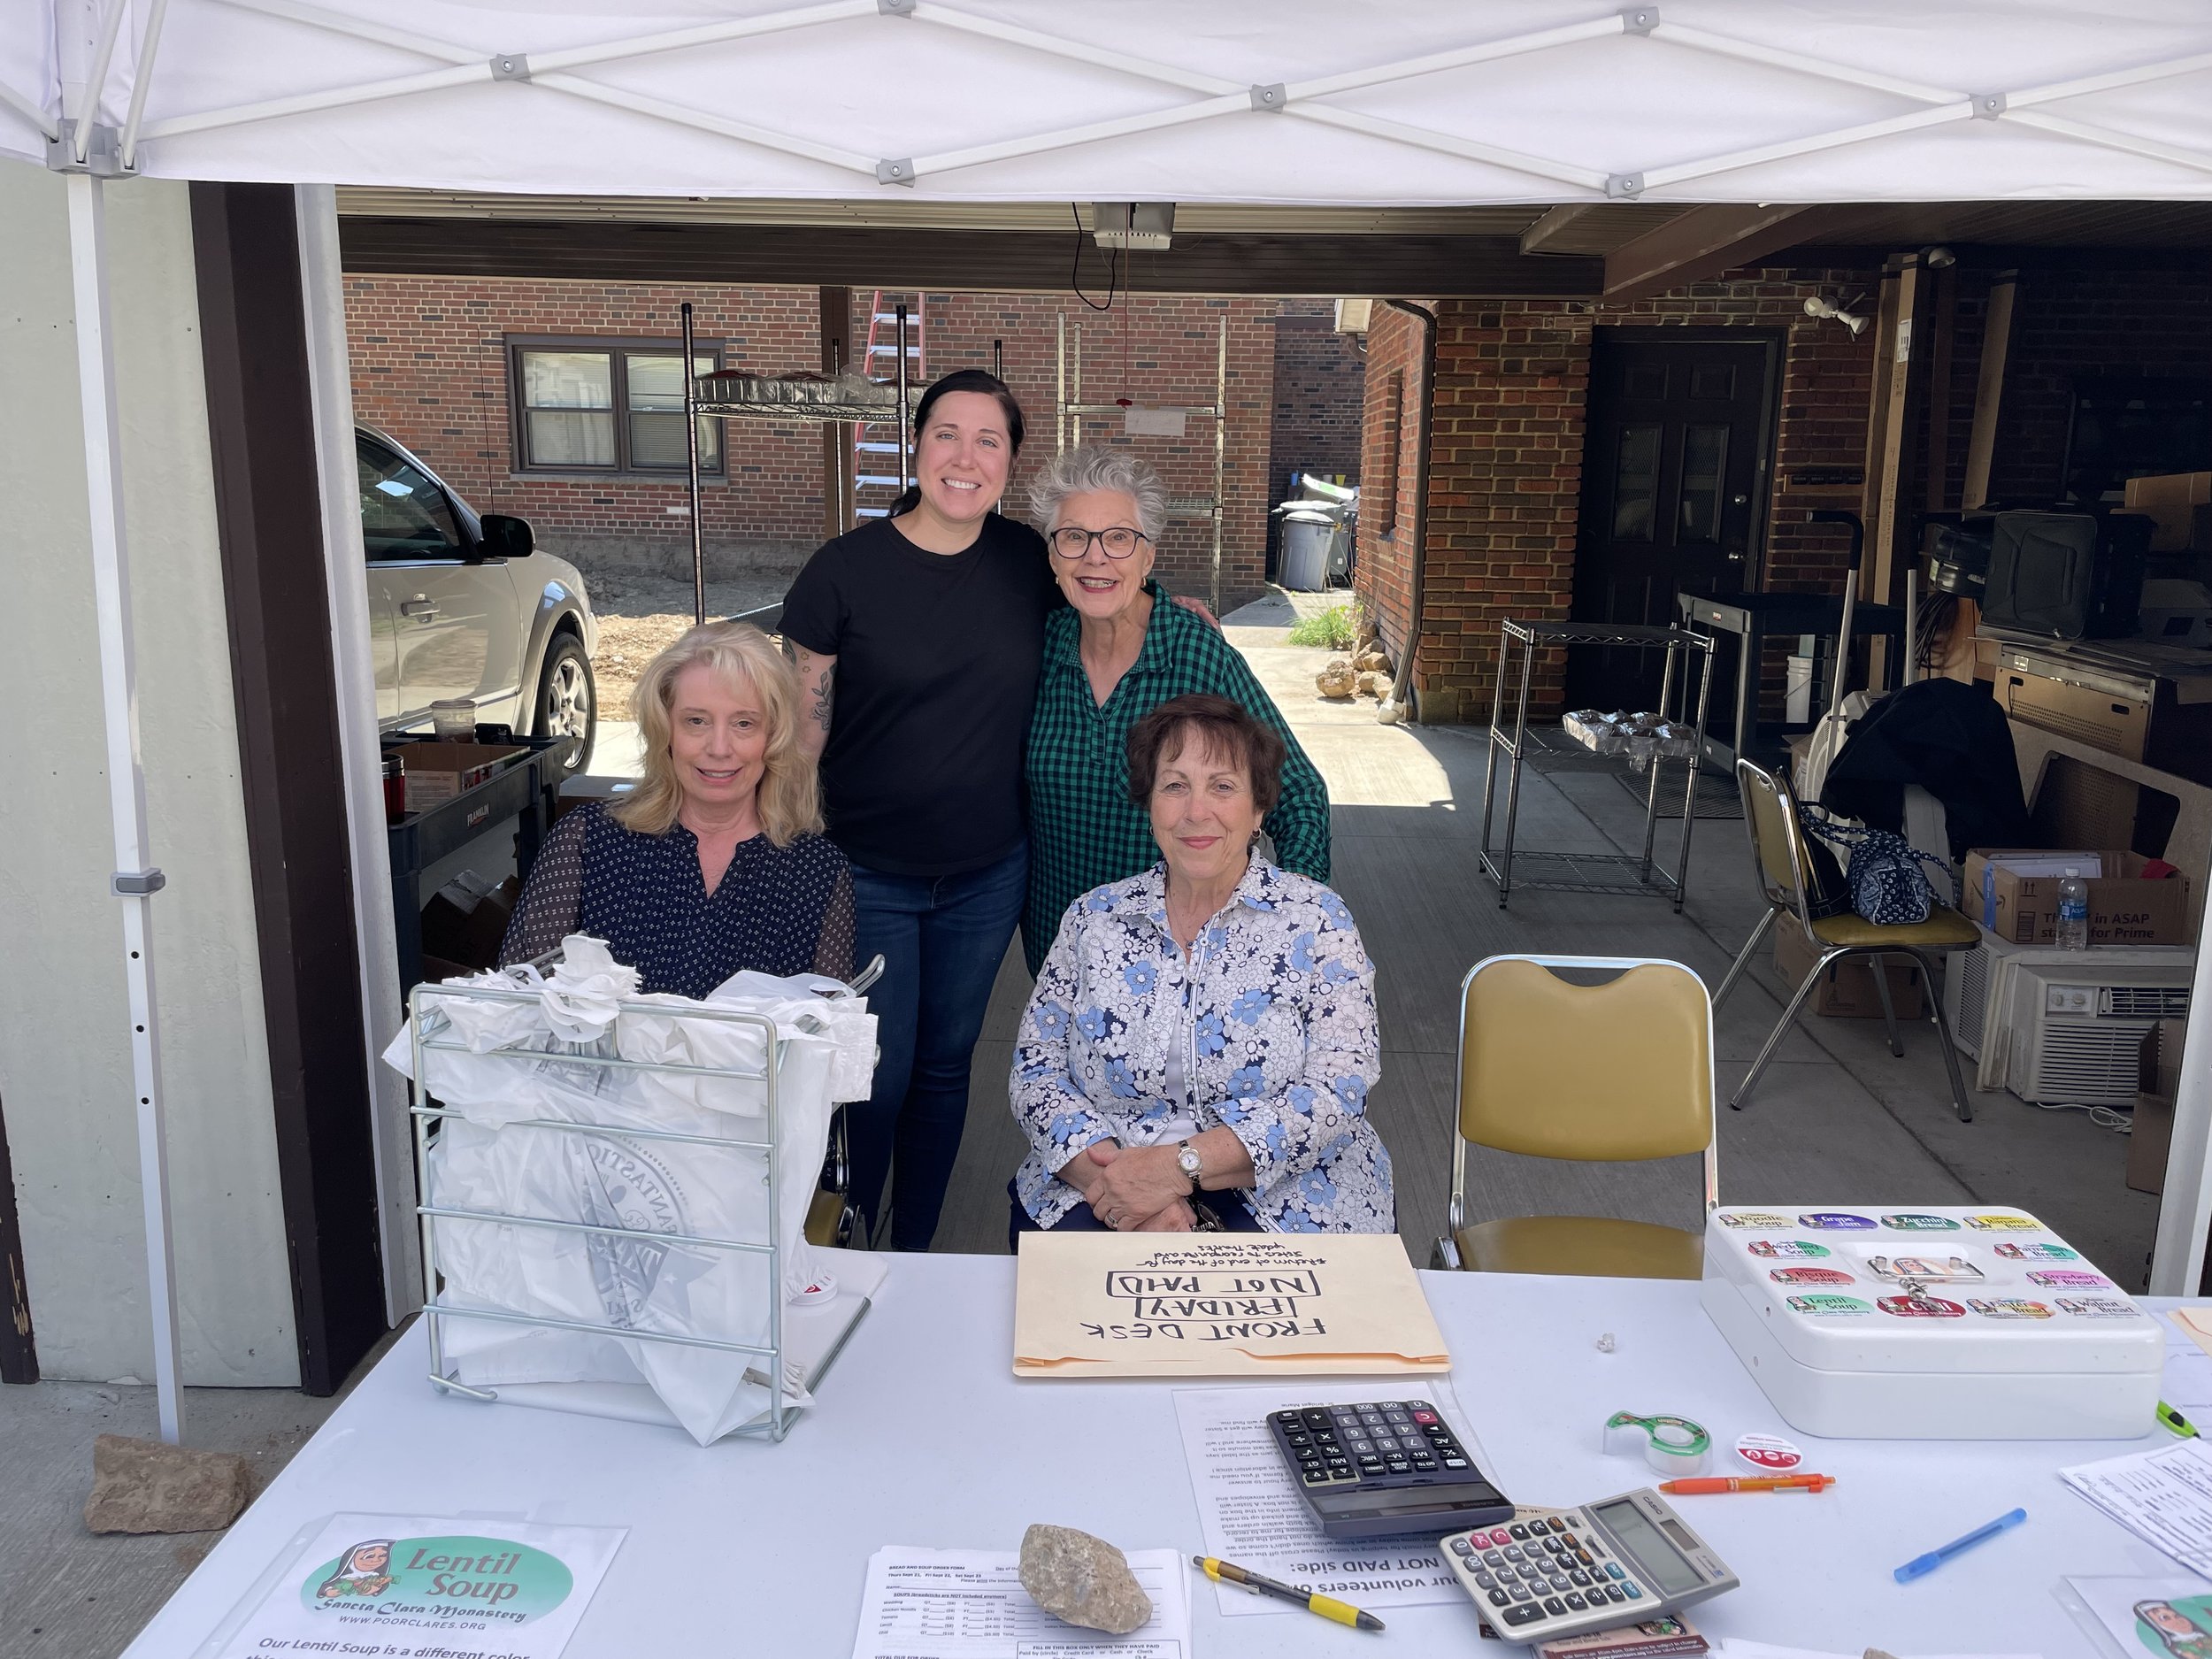  One of the sets of “walkin” or “not paid” side volunteers: Debbie, Judi, Louise, and Carol. Thank you Louise for manning the cash box and forms so everything comes out 